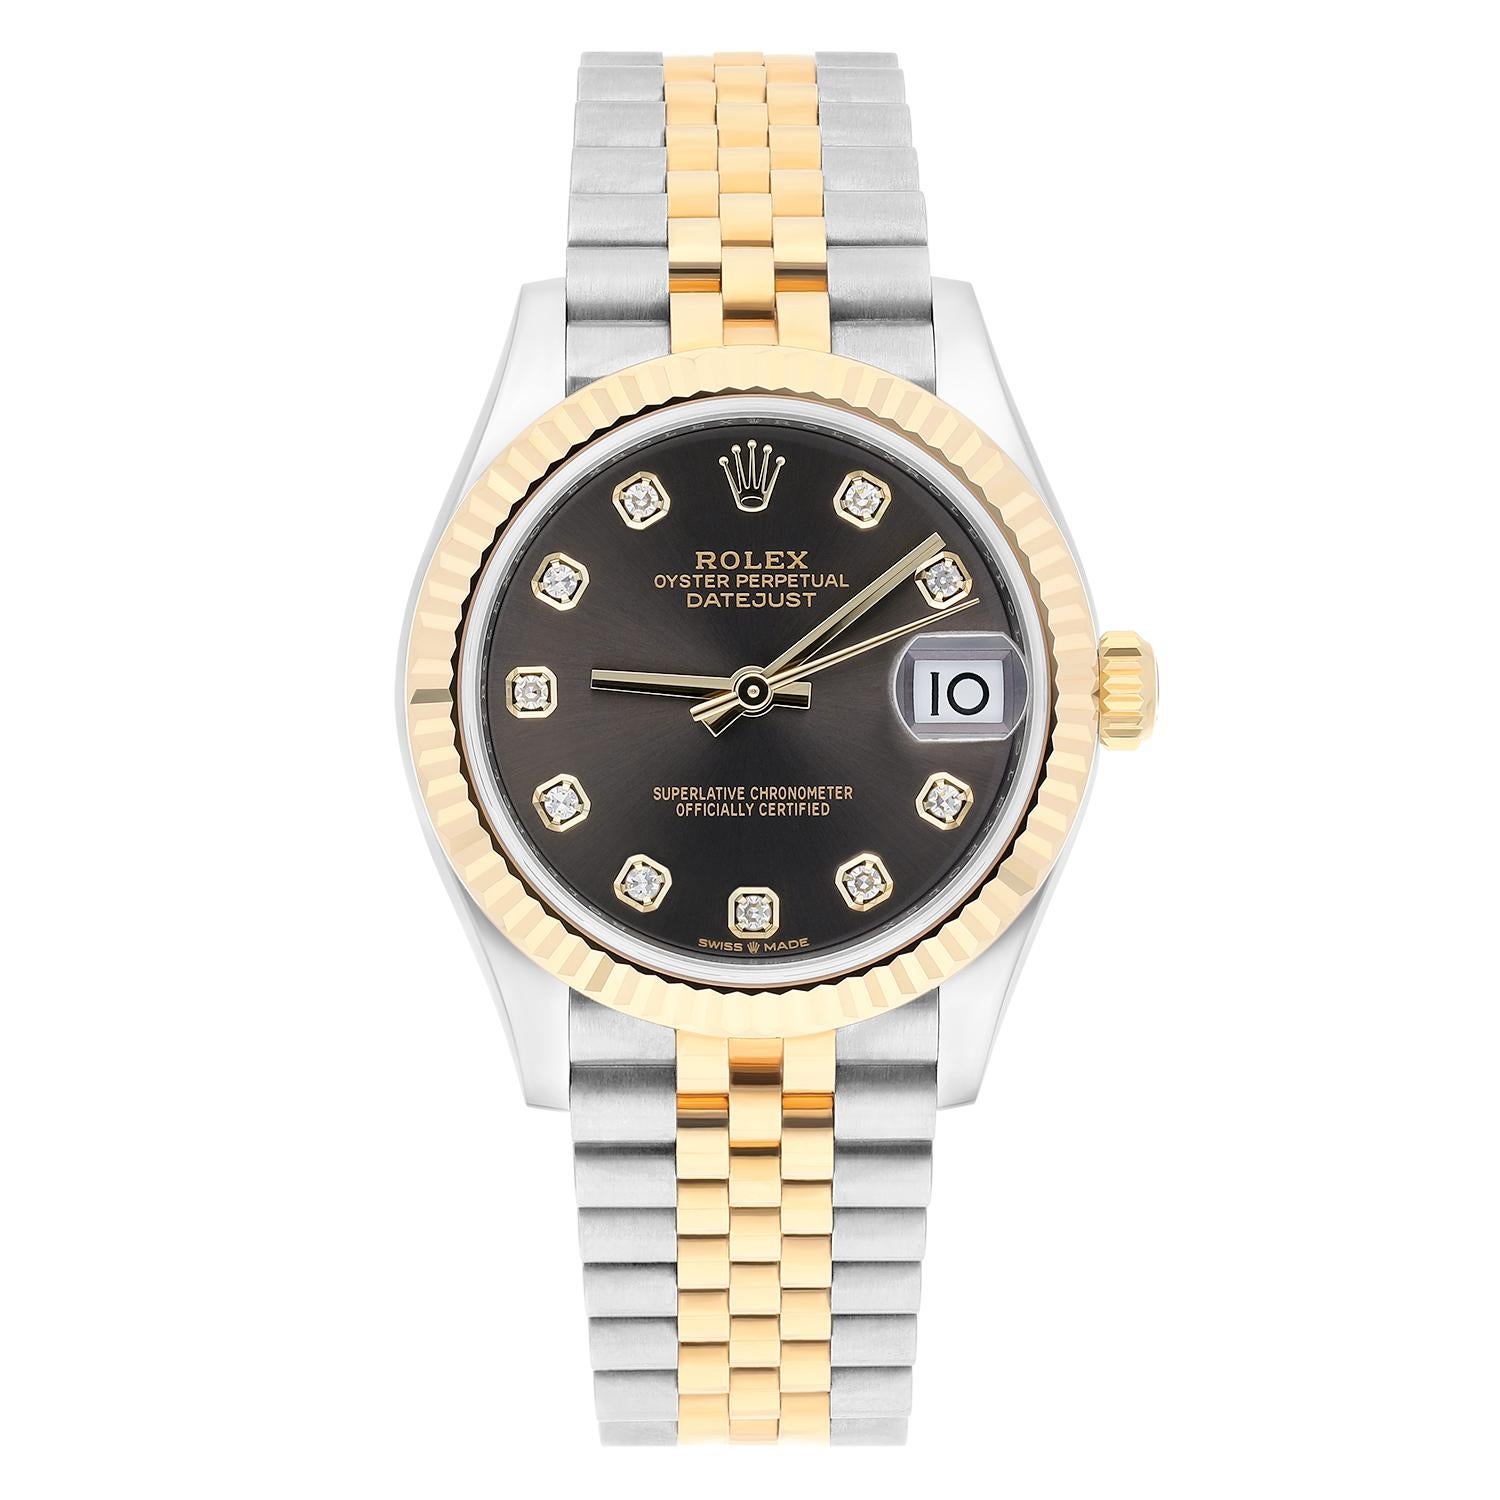 This watch has been professionally polished and does not have any visible scratches or blemishes. It is a genuine Rolex which has been inspected to verify authenticity. Manufacturer's warranty is valid until January 2026.


Sale comes with Rolex box